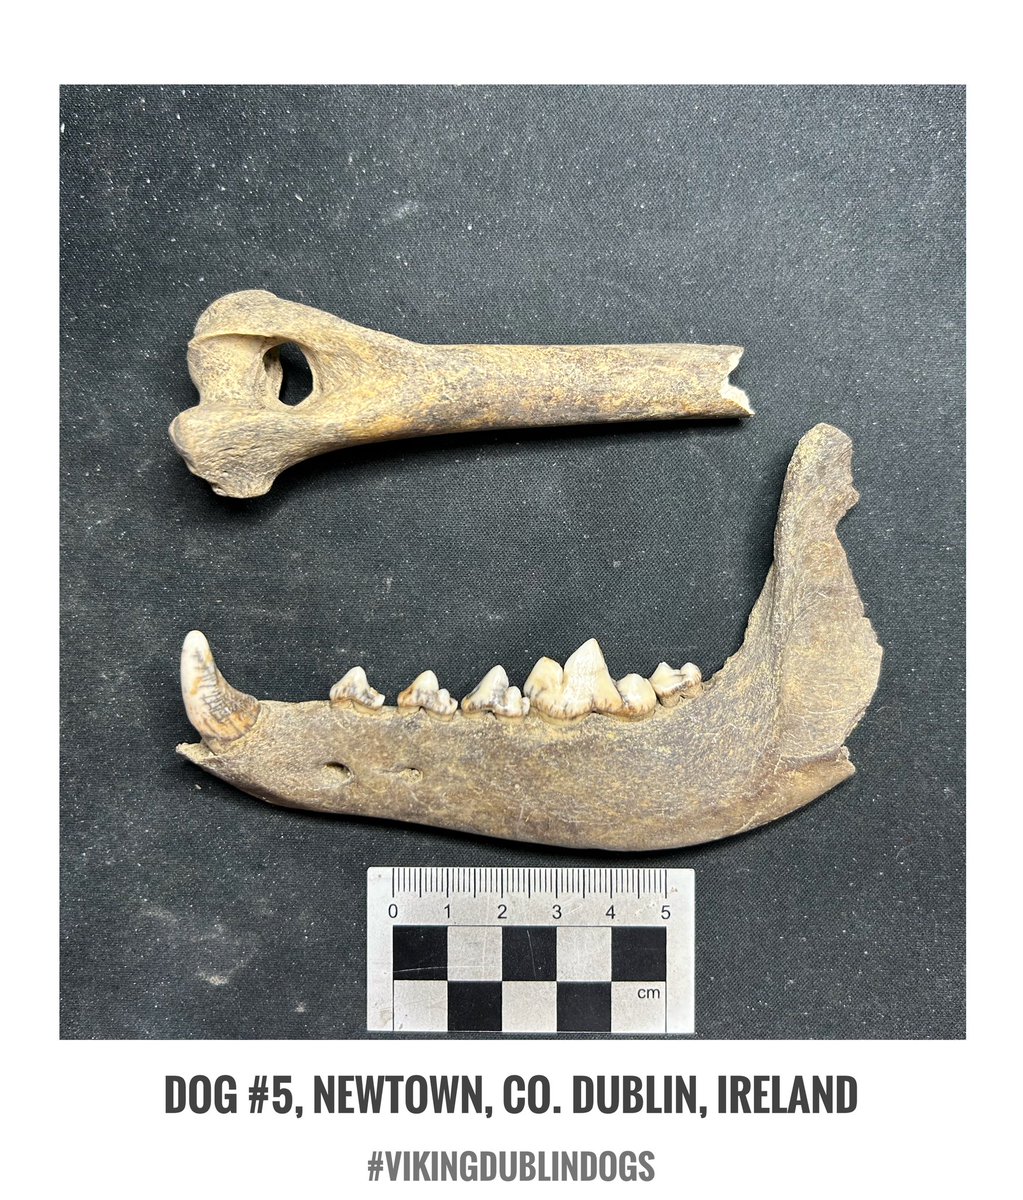 Dog #5 is also from Newtown, Co. Dublin hinterland site. Just a partial humerus fore leg bone and a partial lower jaw with some teeth.  This site did yield a lot of dog skeletal remains. These dogs tend to be in the medium to larger type ranges. #VikingDublinDogs #zooarch #dogs